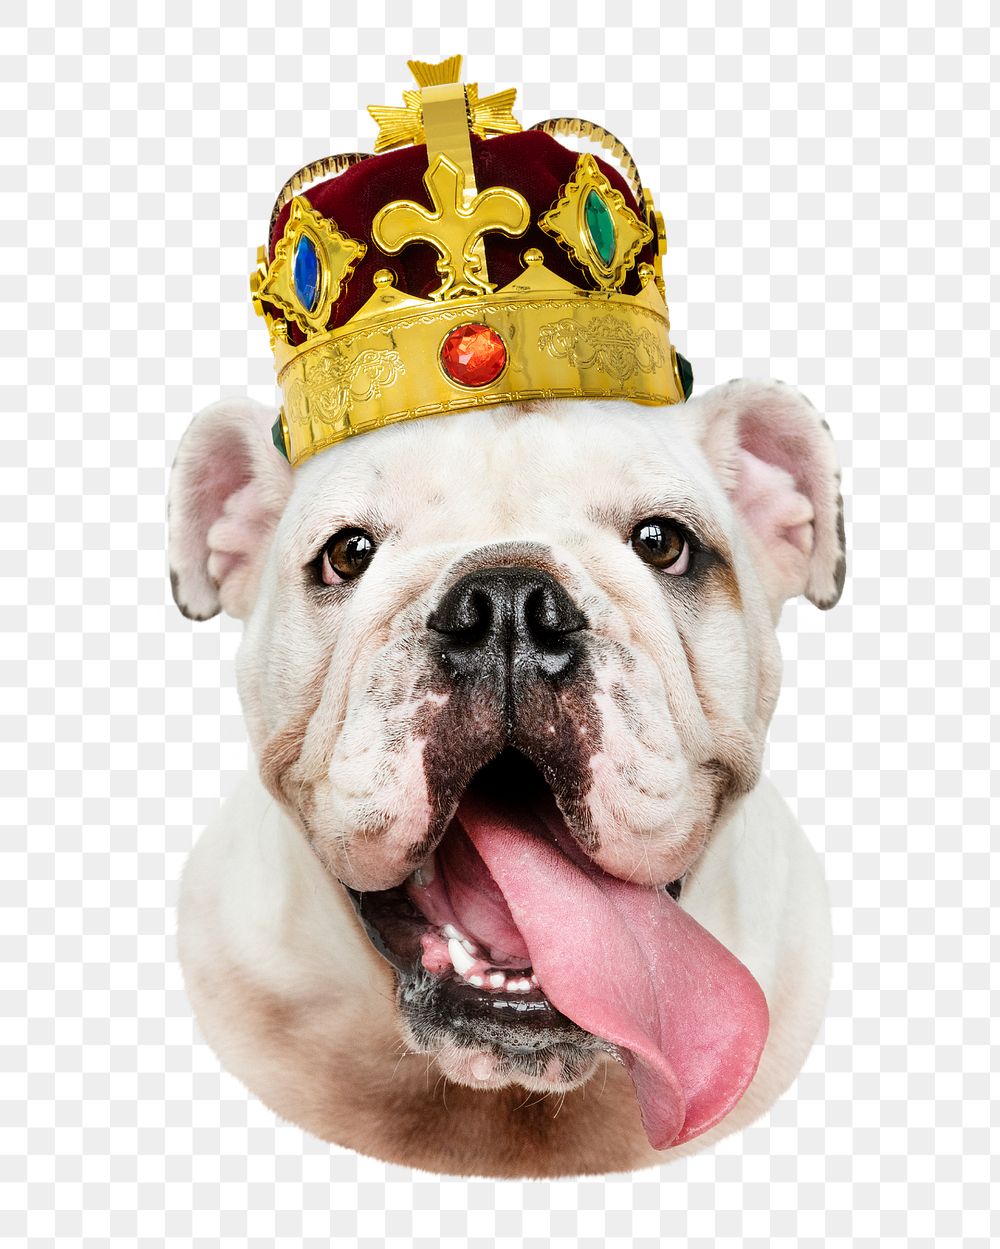 Bulldog with gold crown png sticker, transparent background